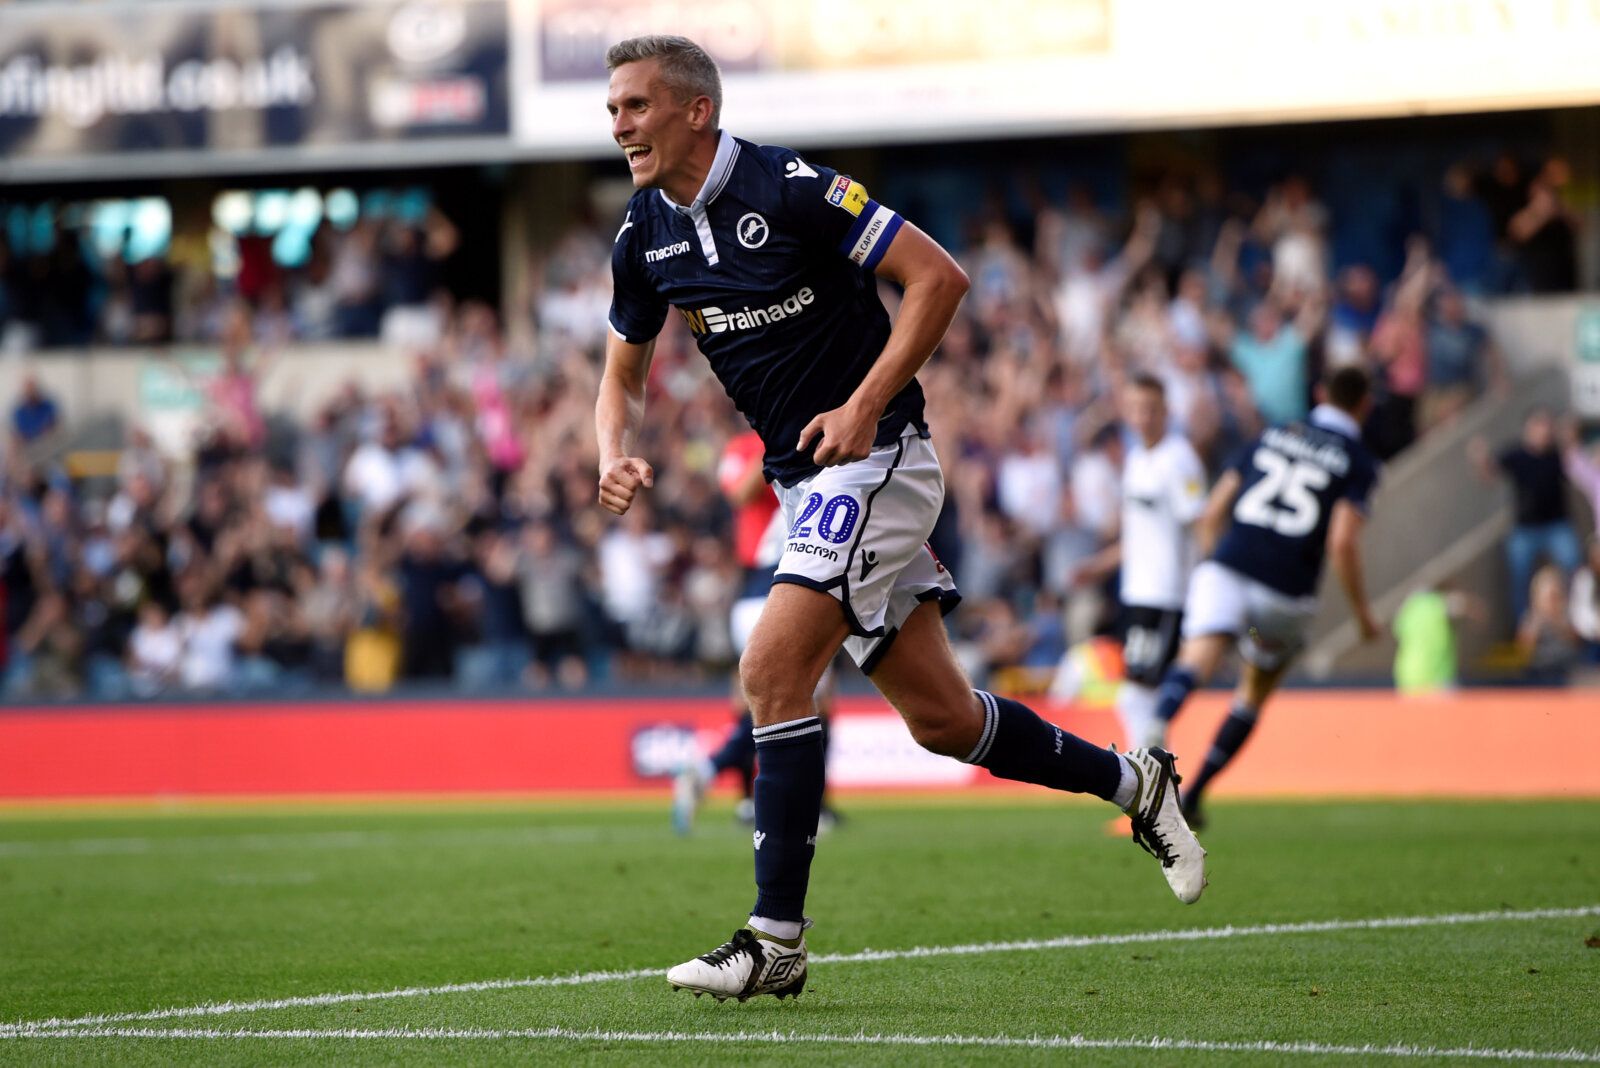 Soccer Football - Championship - Millwall v Swansea City - The Den, London, Britain - September 1, 2018  Millwall's Steve Morison celebrates their first goal scored by Murray Walace     Action Images/Adam Holt  EDITORIAL USE ONLY. No use with unauthorized audio, video, data, fixture lists, club/league logos or 